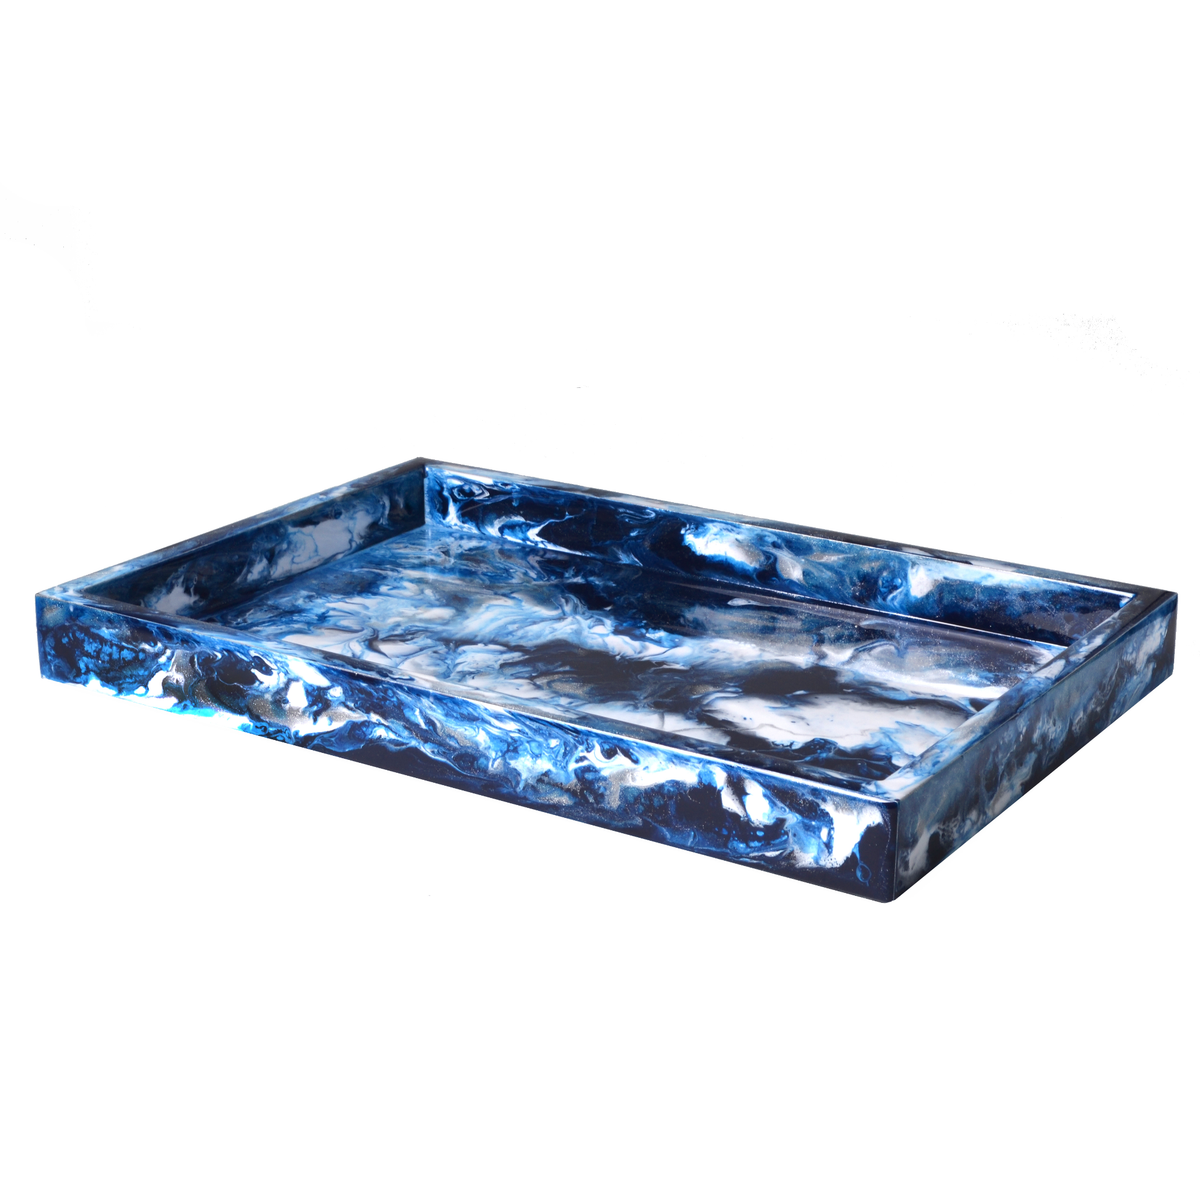 Large Tray of Mike and Ally Elan Bath Accessories Collectioin in Blue Medley Silver Color